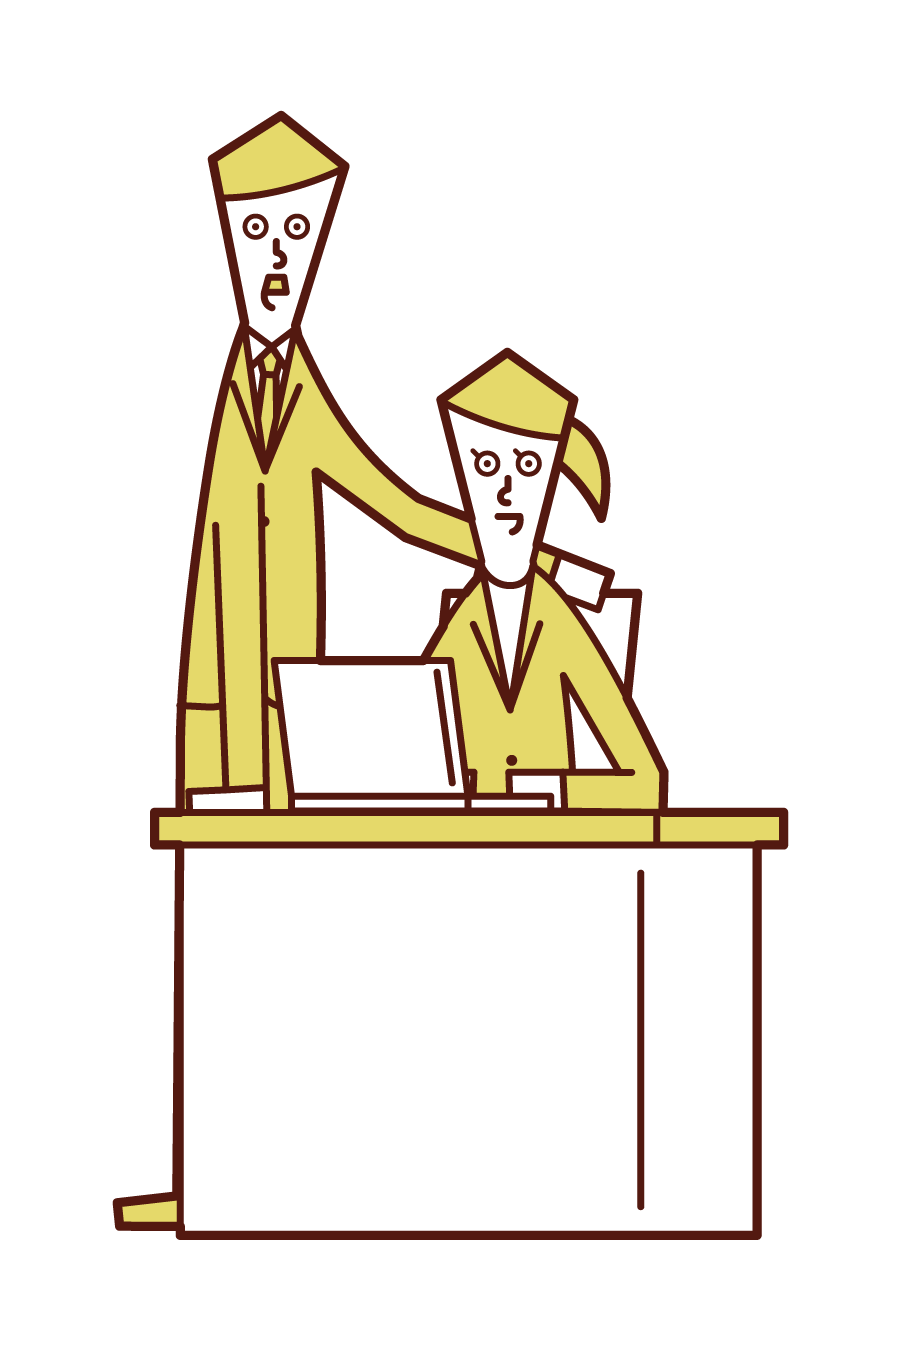 Illustration of a boss (woman) talking to a subordinate